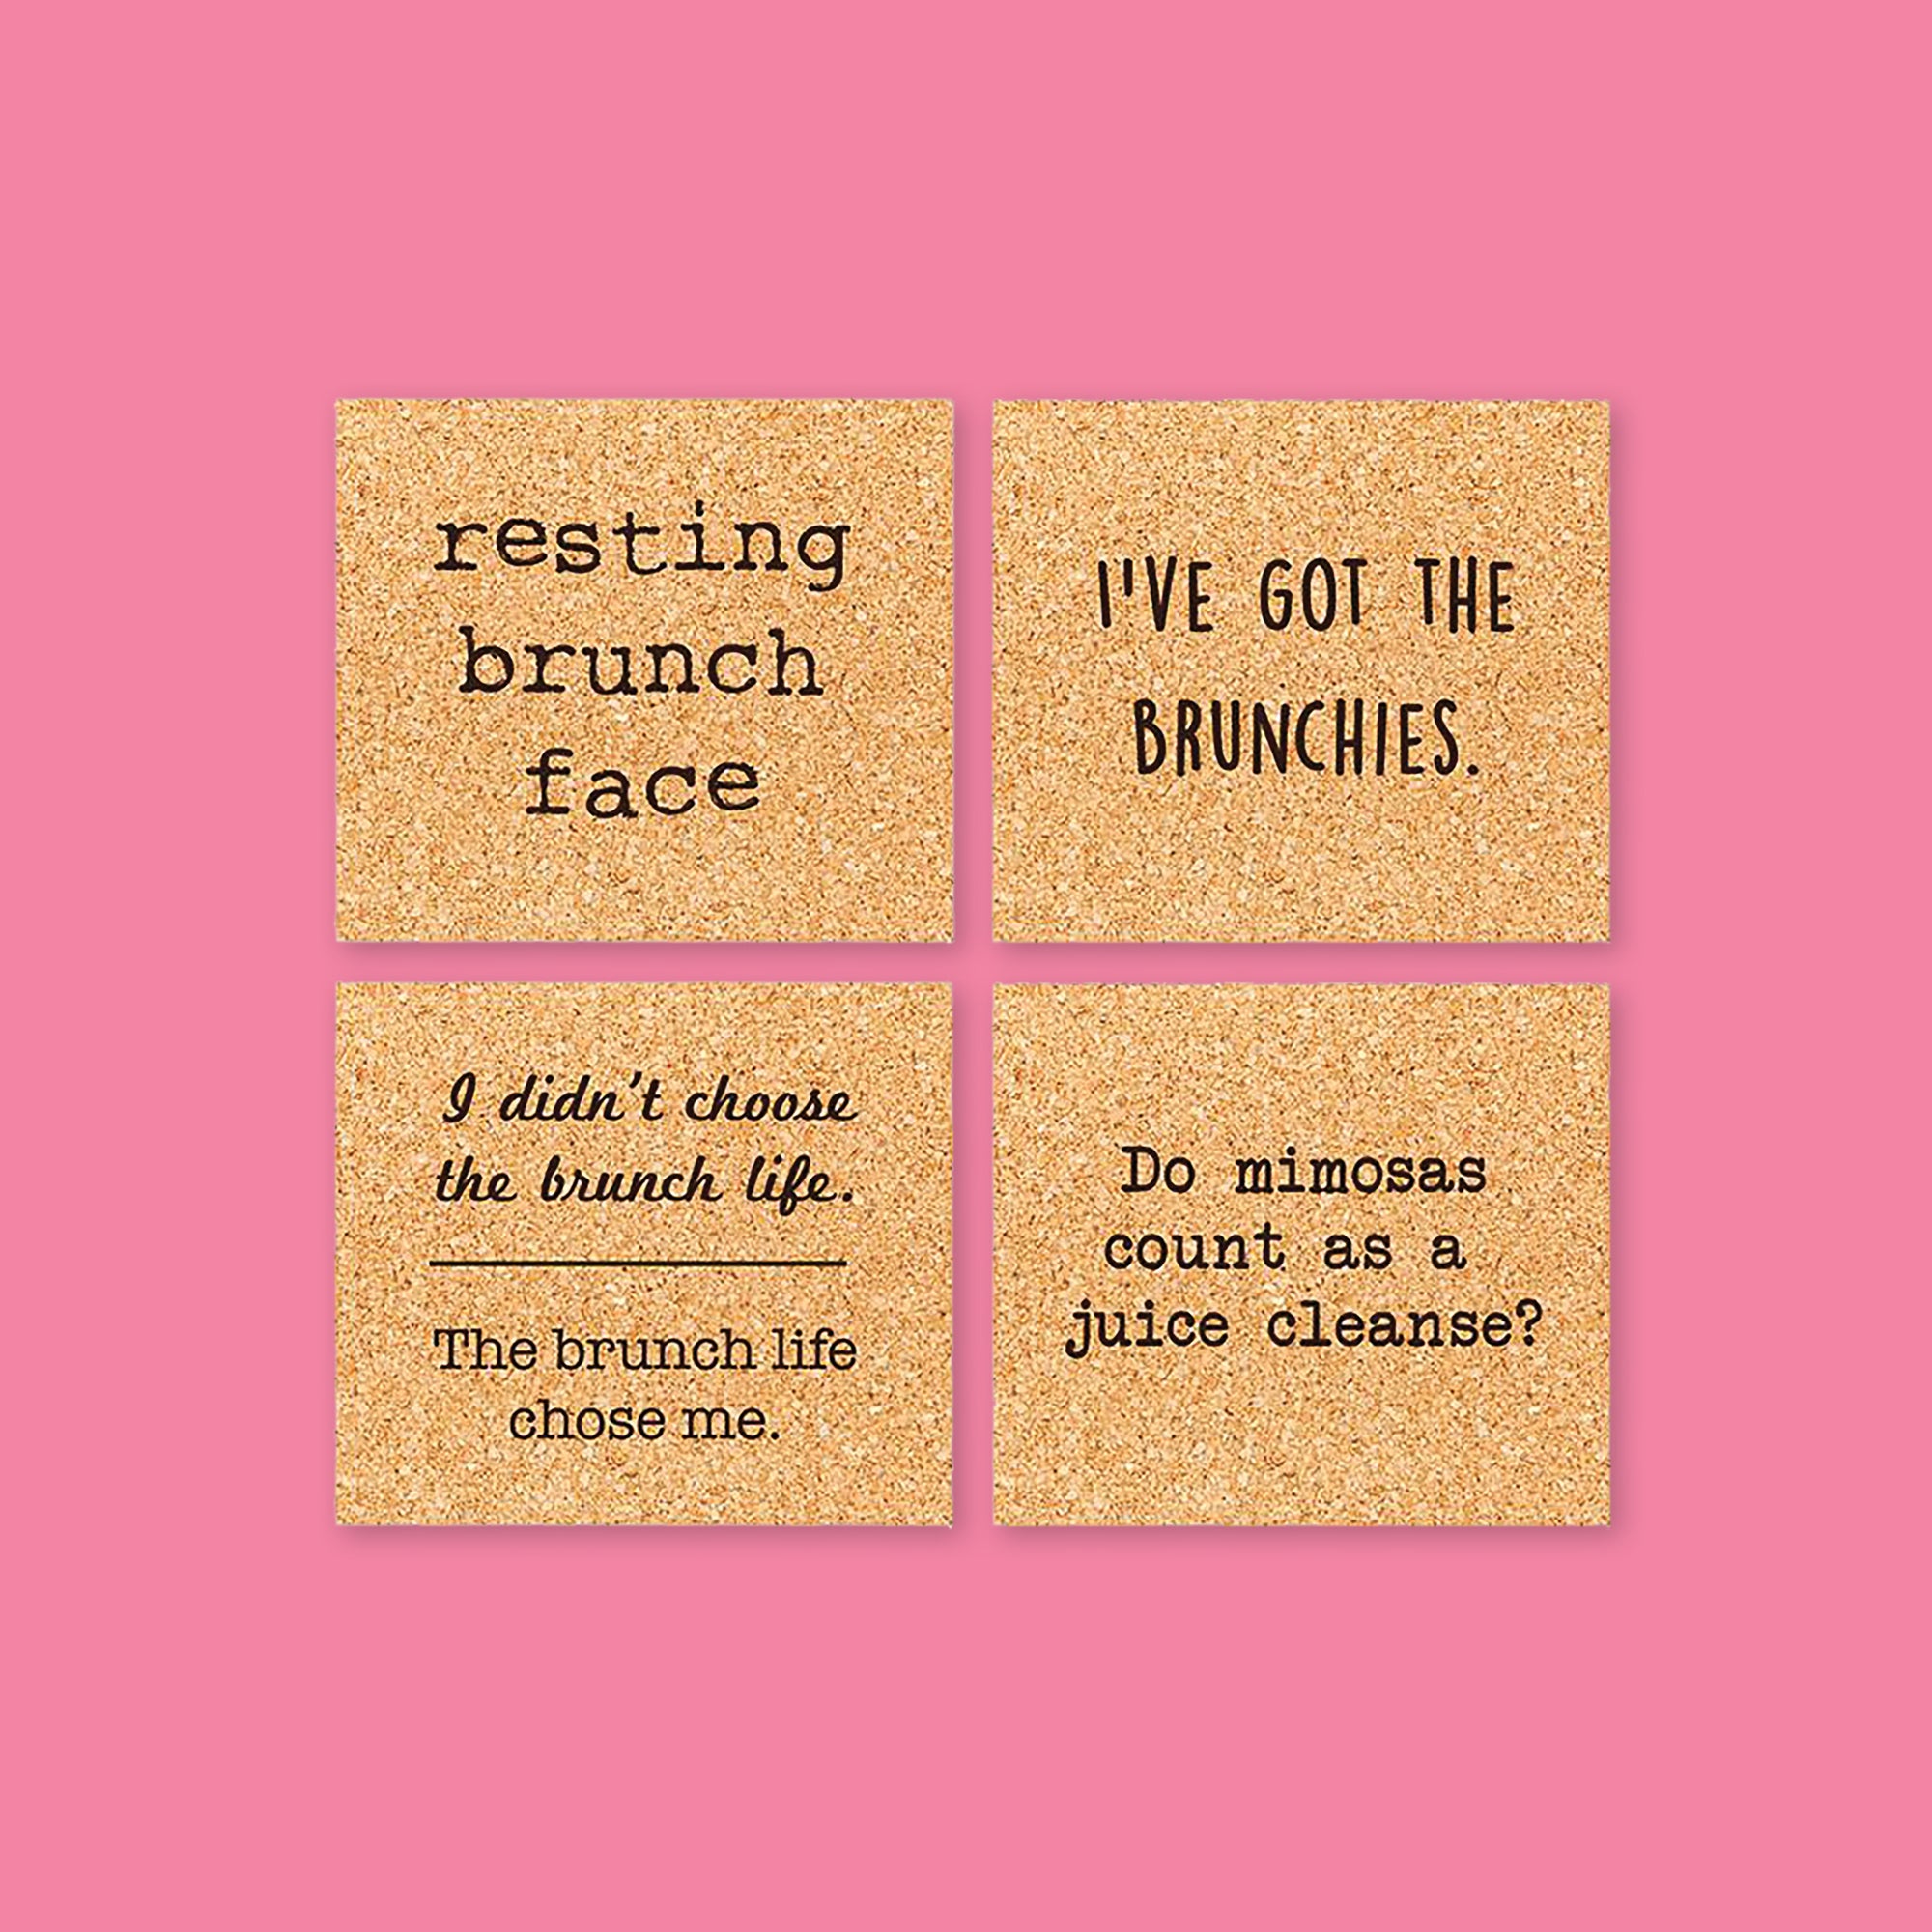 On a bubblegum pink background sits four coasters. These coasters are cork and have different sayings on each one. The top left one says "resting brunch face" in black, typewriter font. The top right one says "I'VE GOT THE BRUNCHIES" in black, handwritten lettering. The bottom left one says "I didn't choose the brunch life. The brunch life chose me." in a black script and typewriter font. The bottom right one says "Do mimosas count as a juice cleanse?" in black, typewriter font.